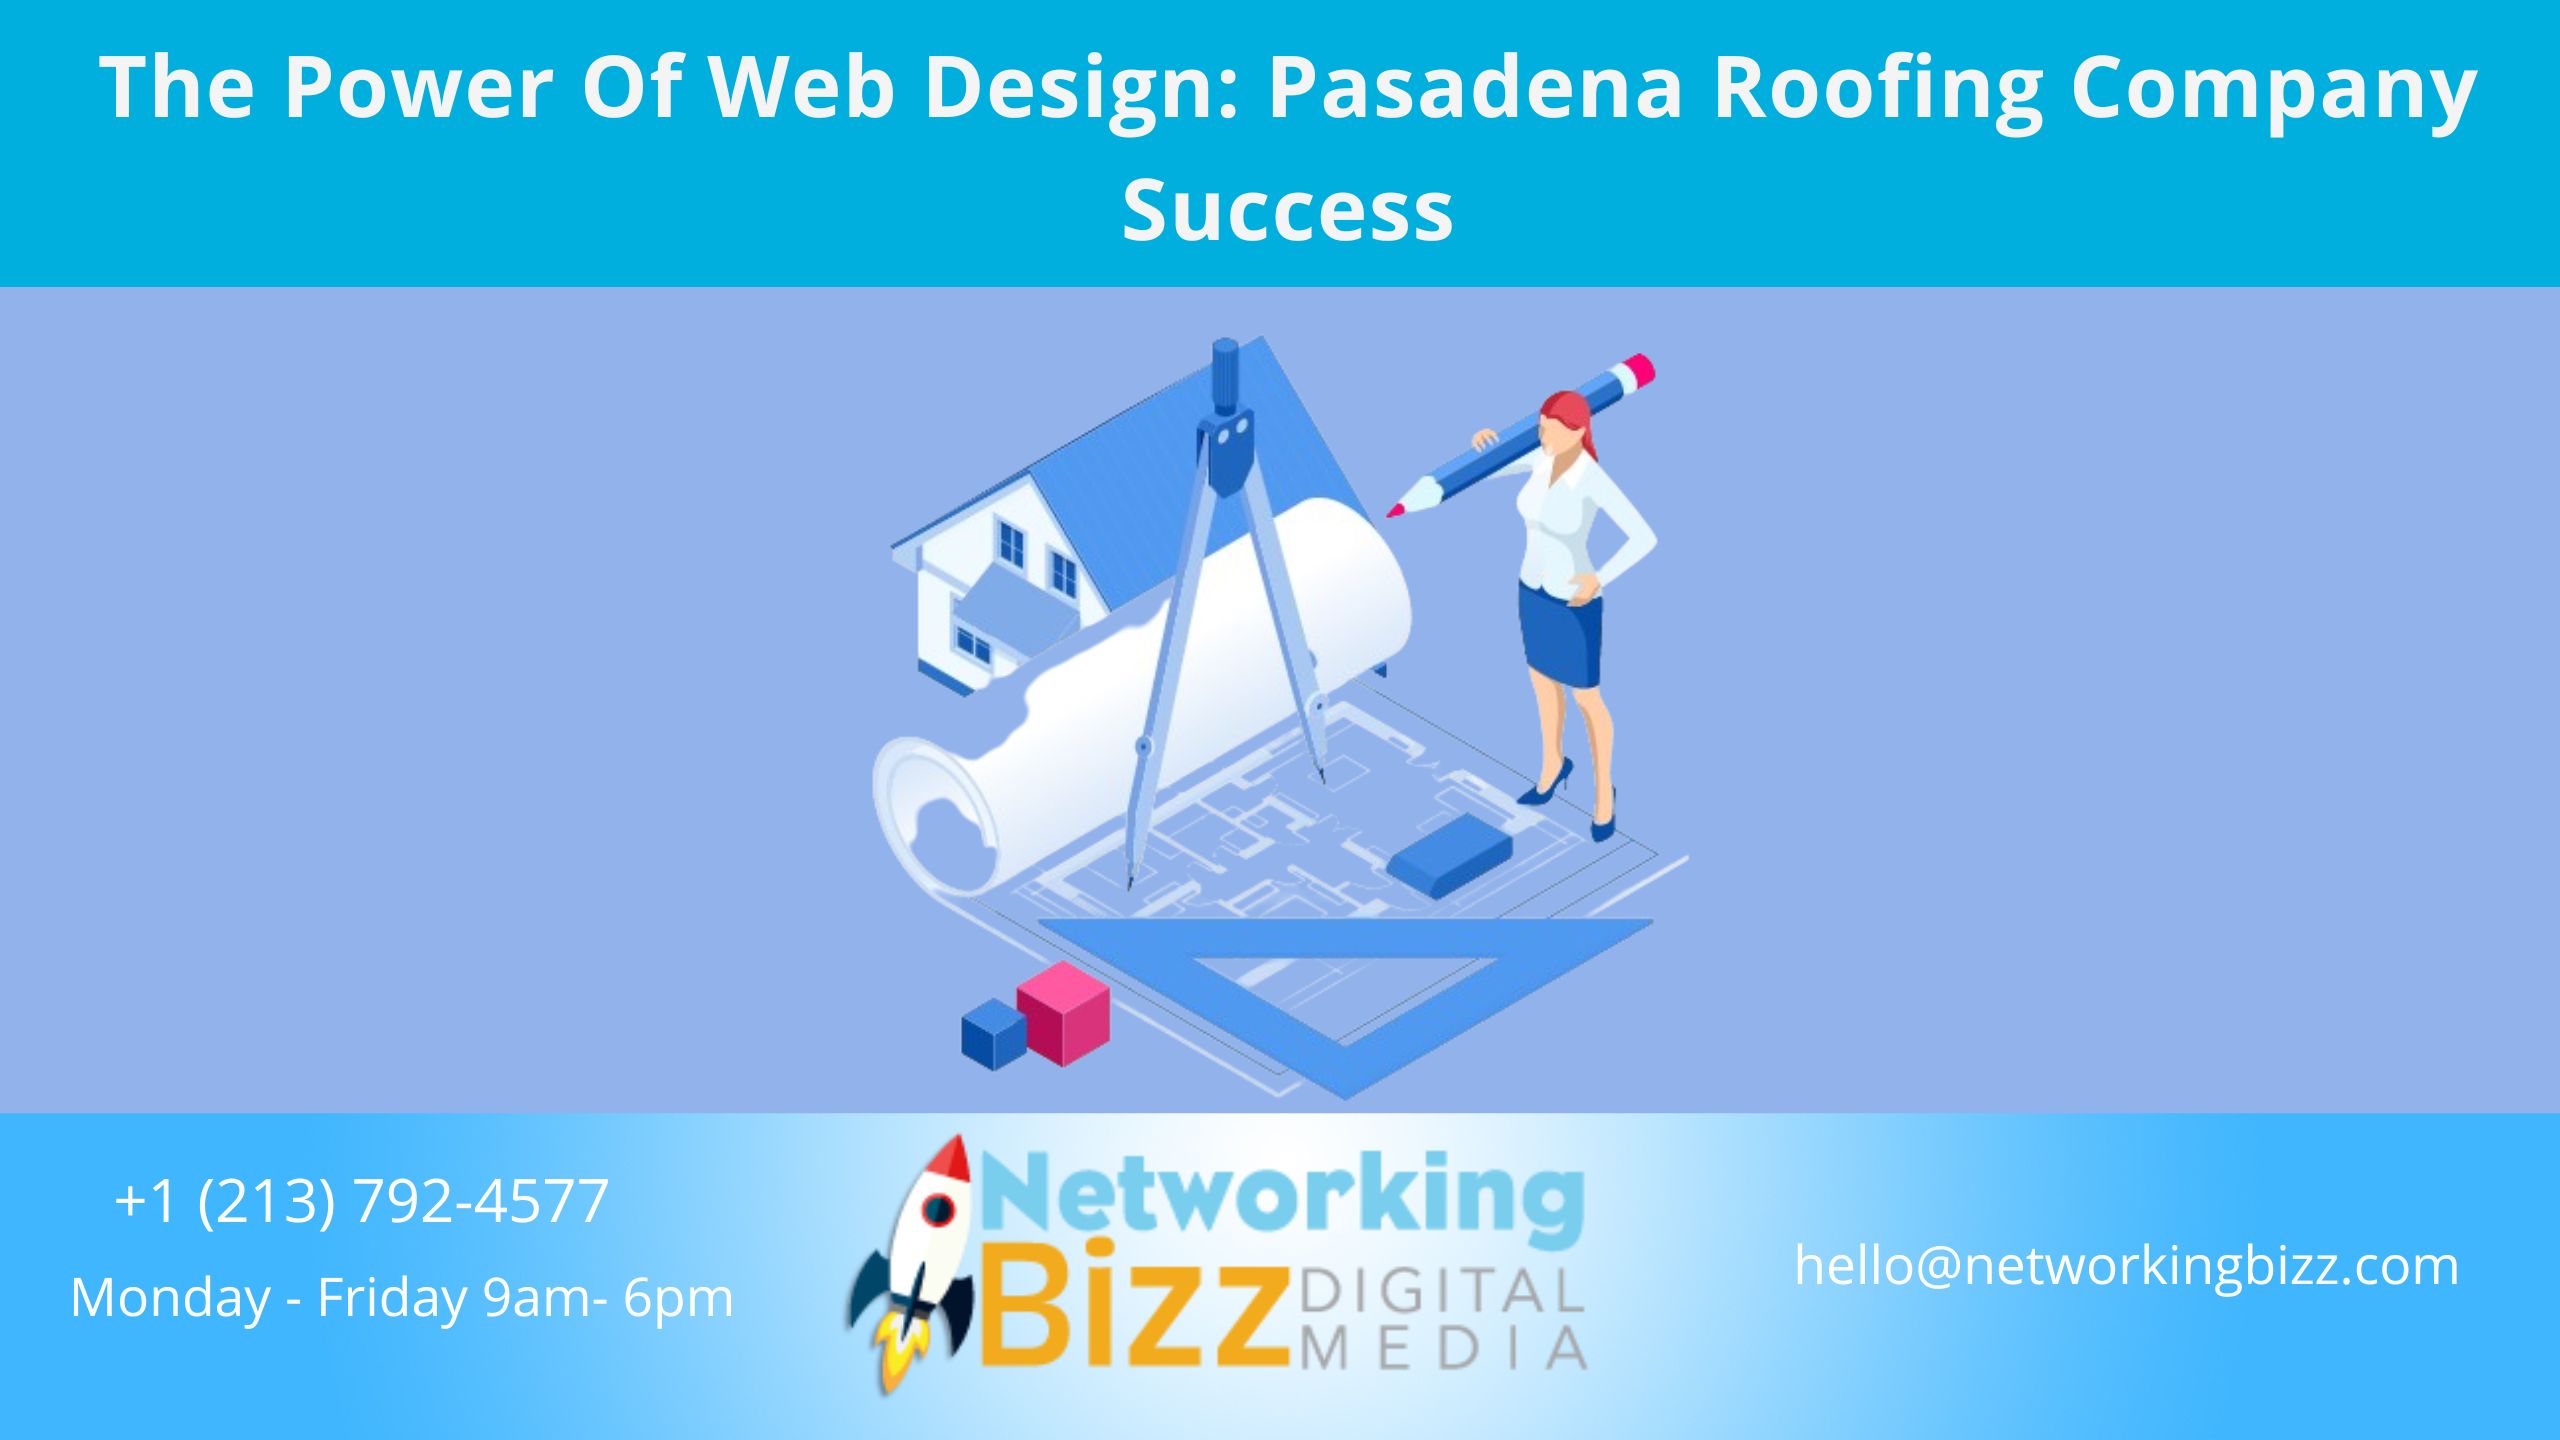 The Power Of Web Design: Pasadena Roofing Company Success